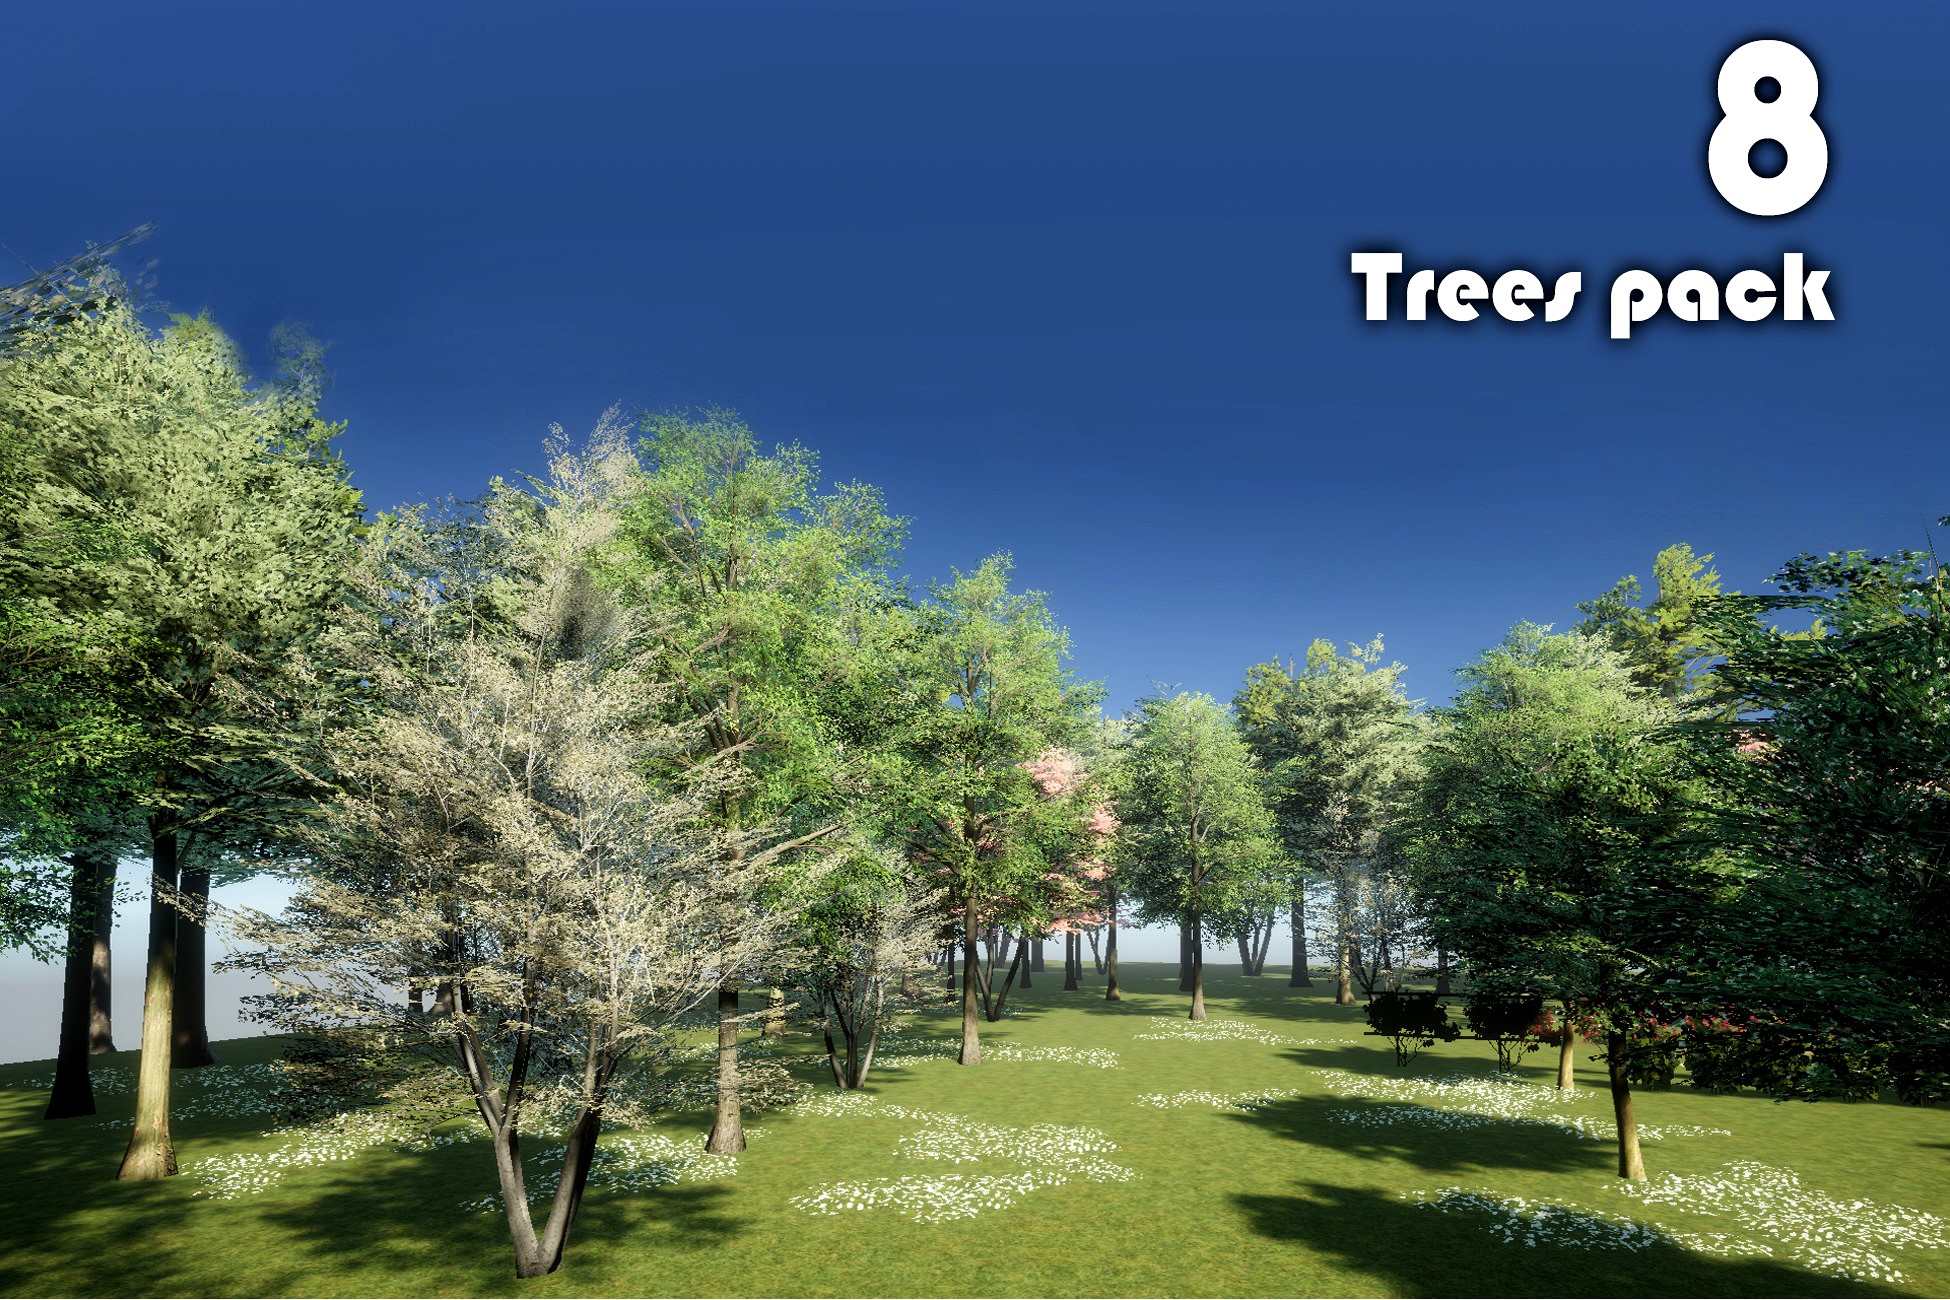 8 Trees pack